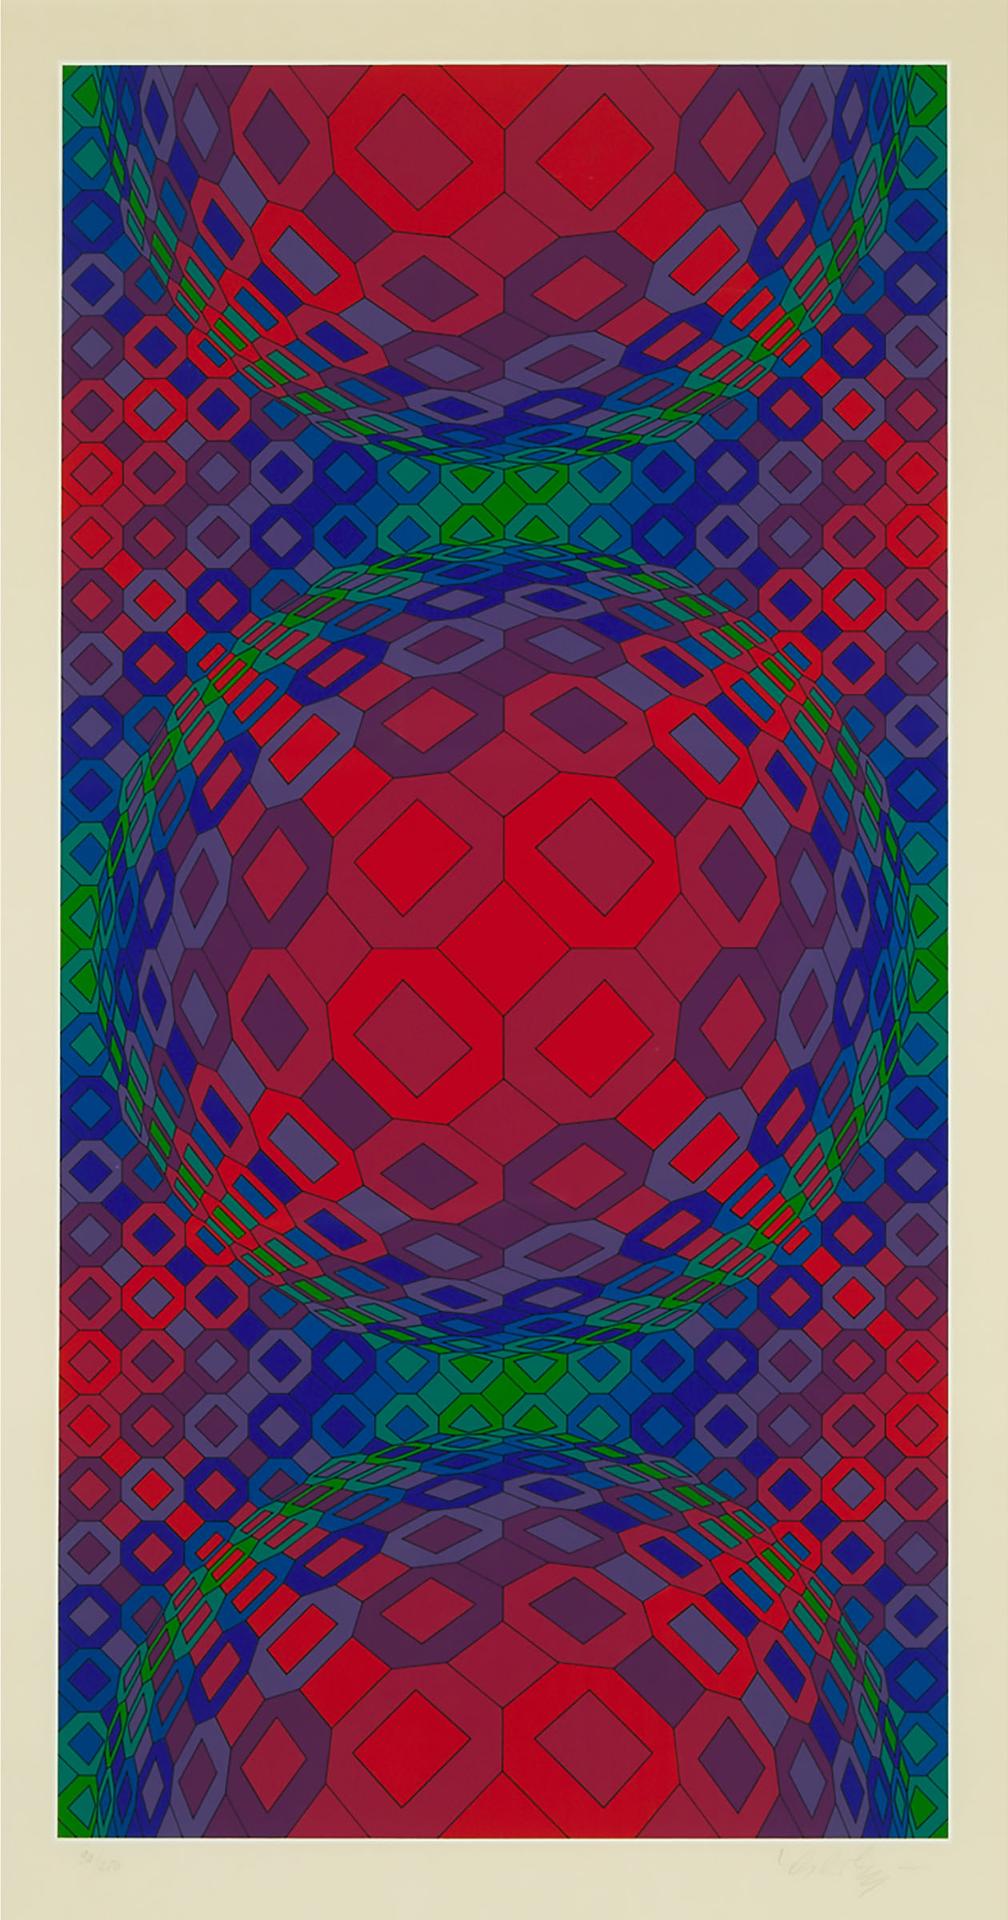 Victor Vasarely (1906-1997) - Osmosis